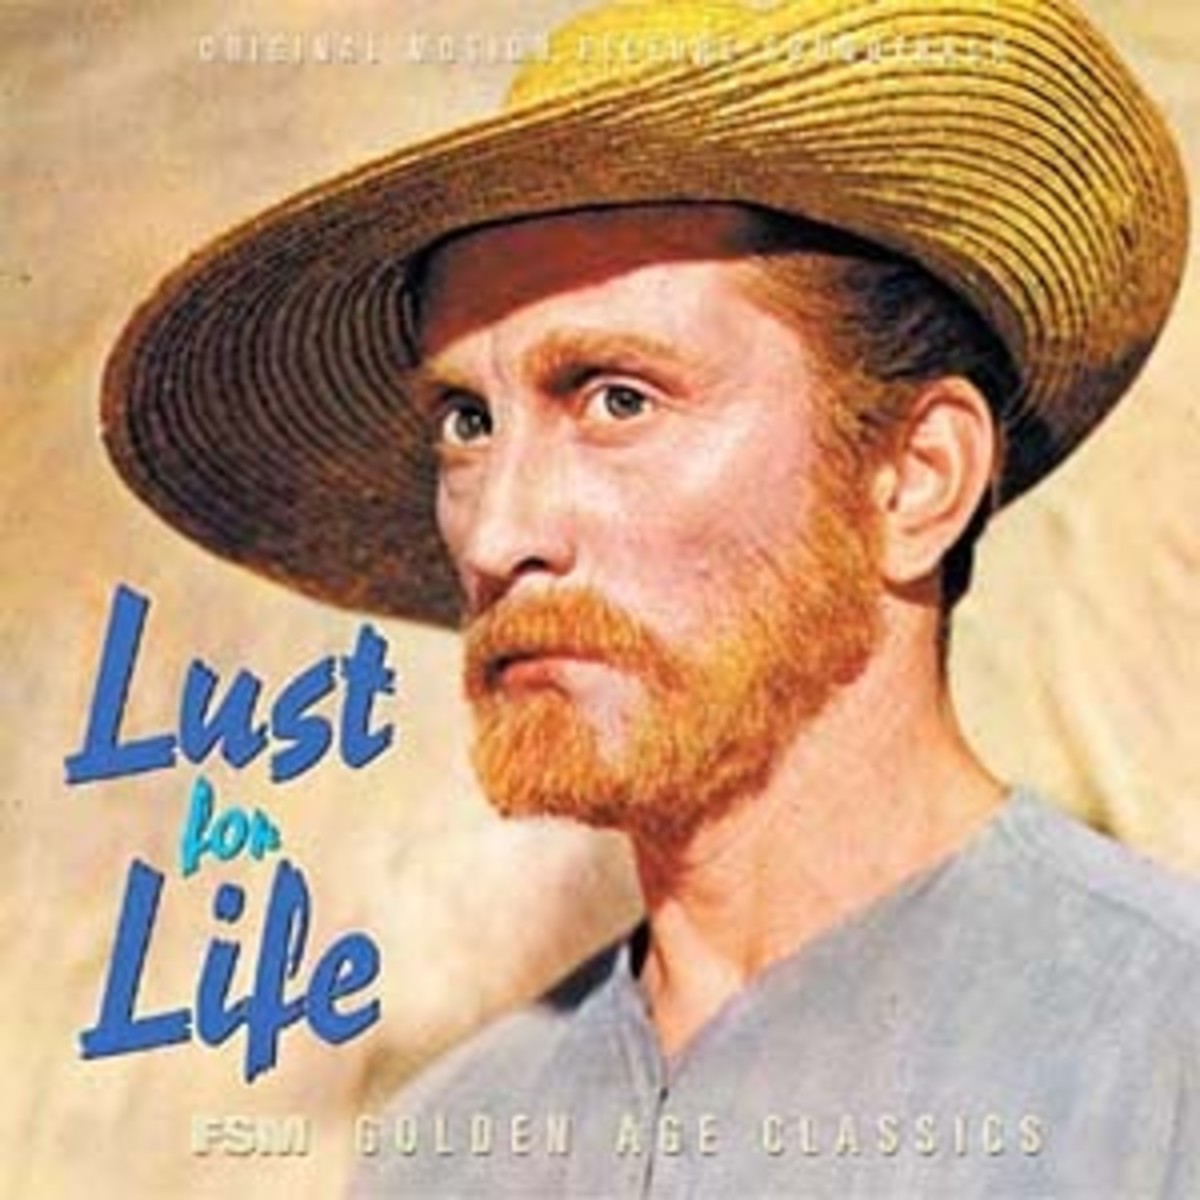 In the 1956 movie "Lust for Life" Kirk Douglas played Vincent van Gogh and was nominated for an Academy Award. 